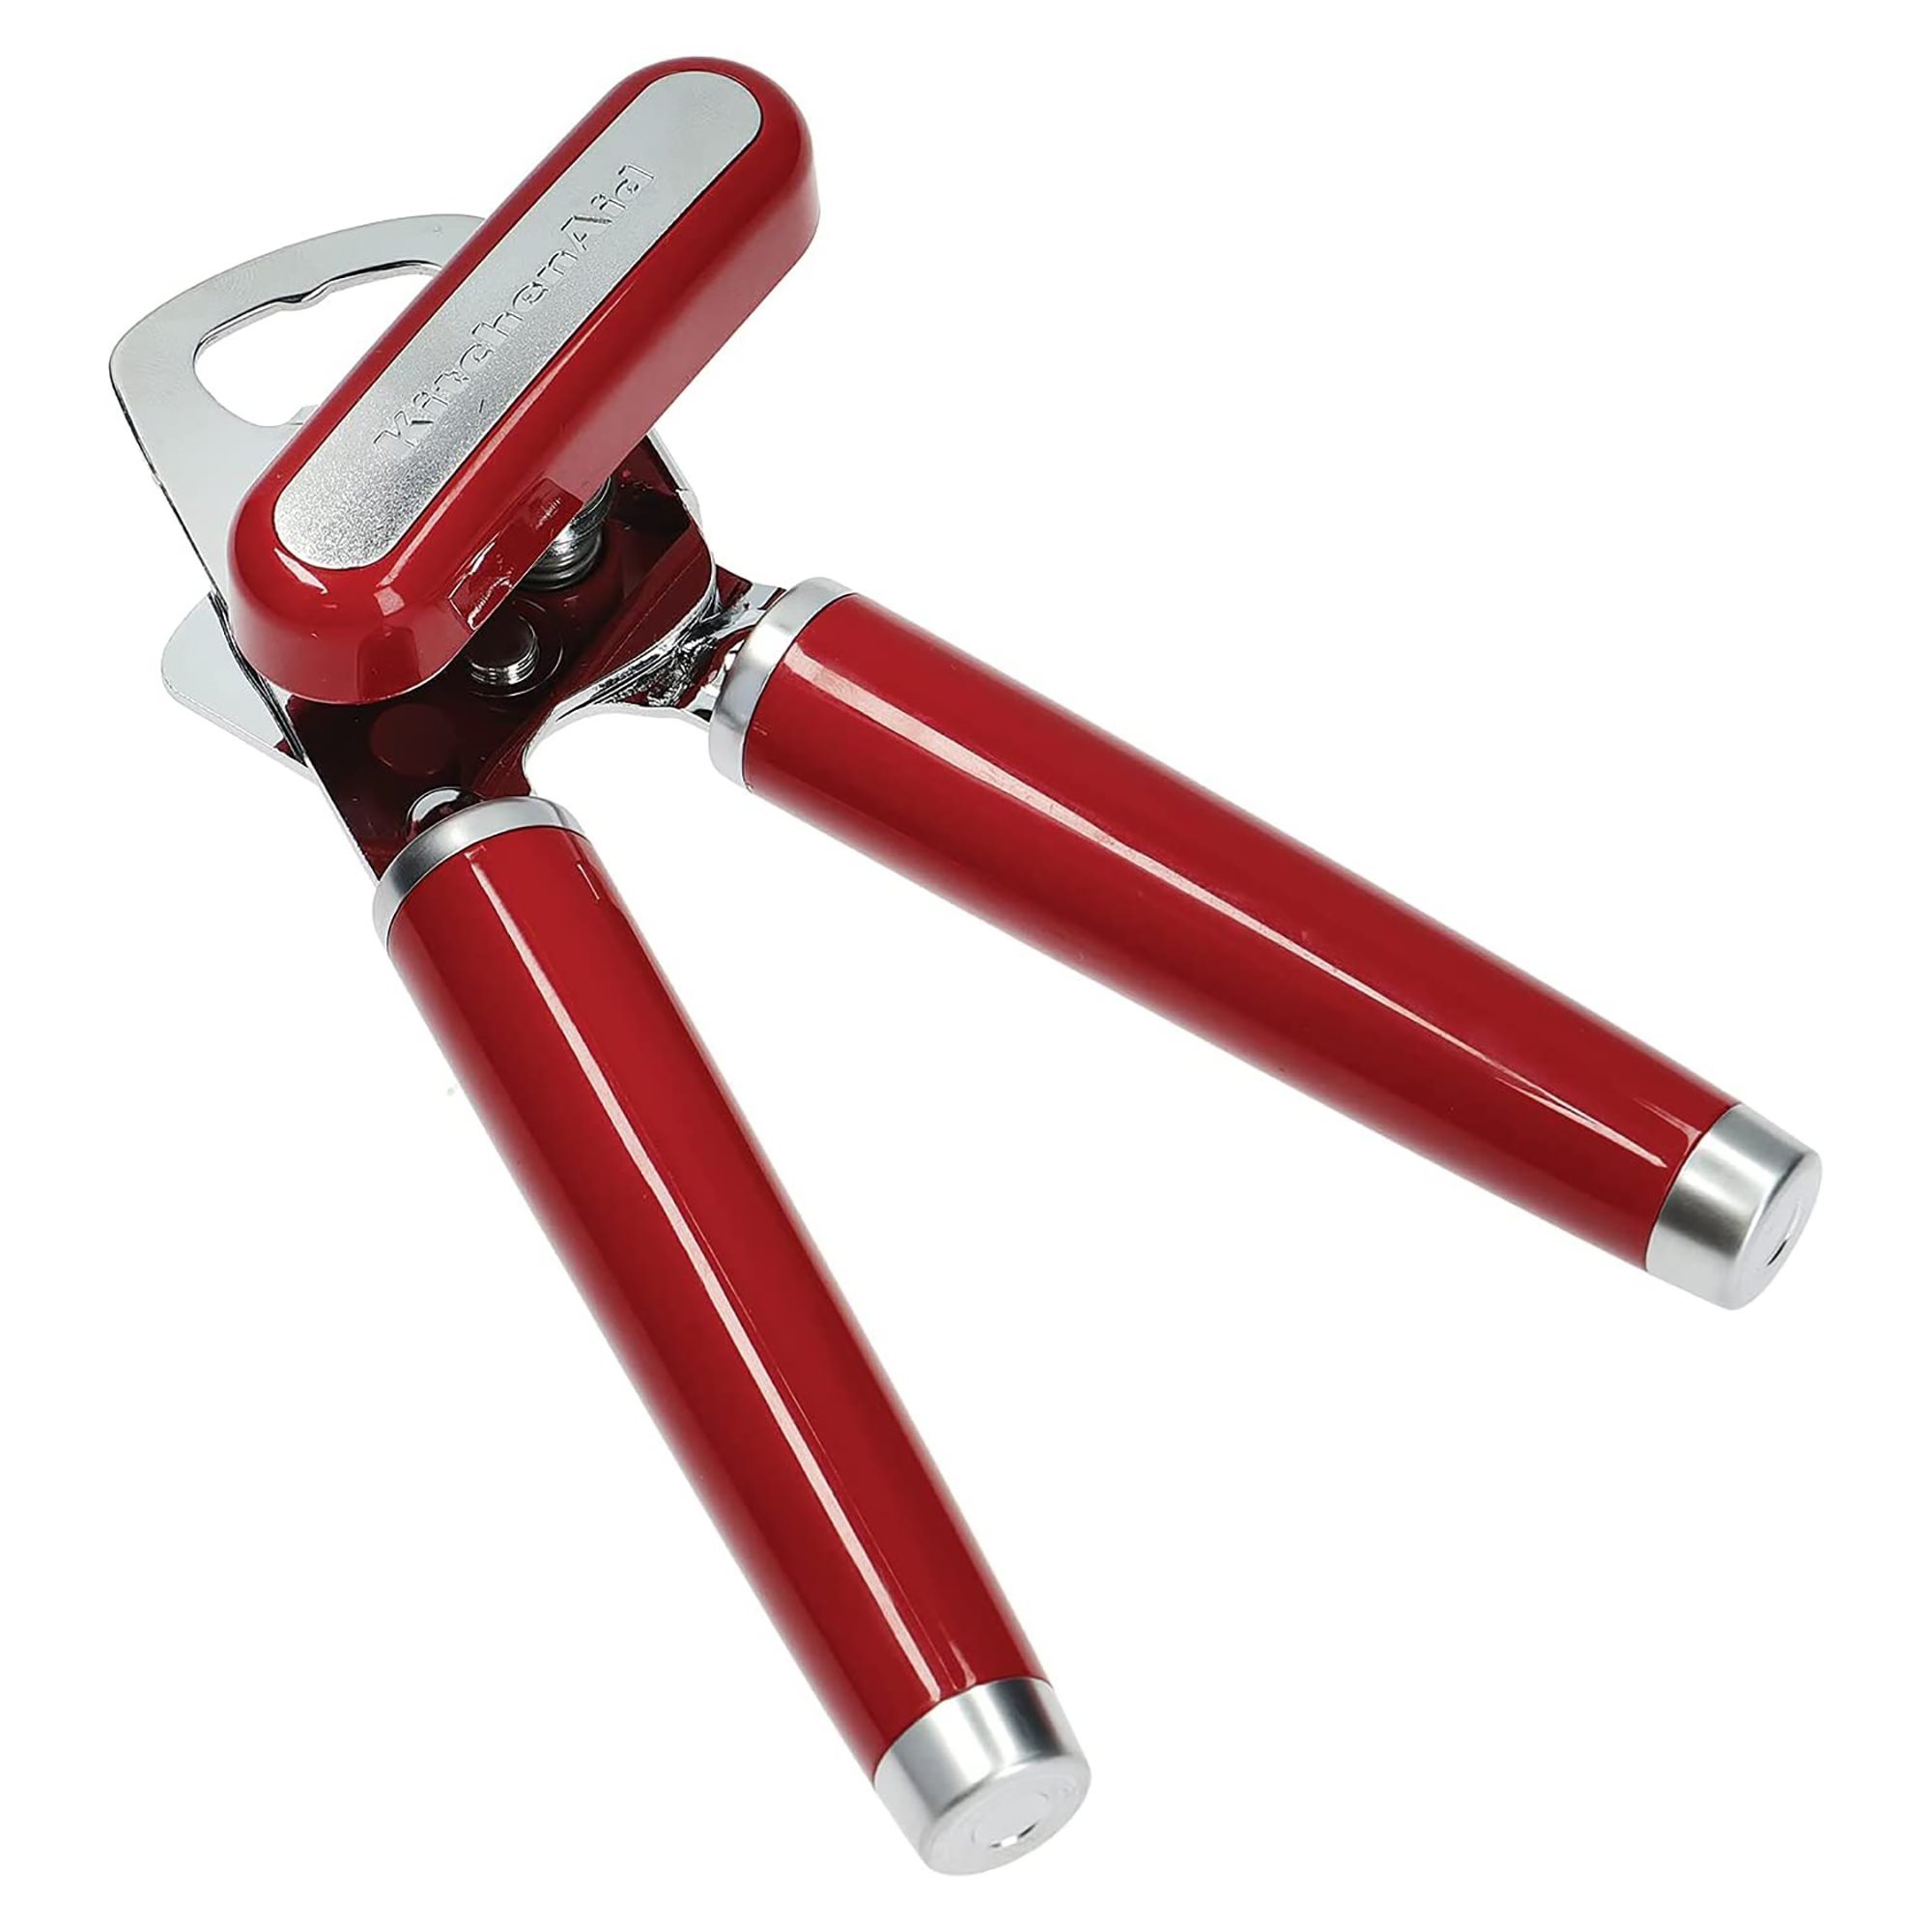 KitchenAid Classic Can Opener (Red)